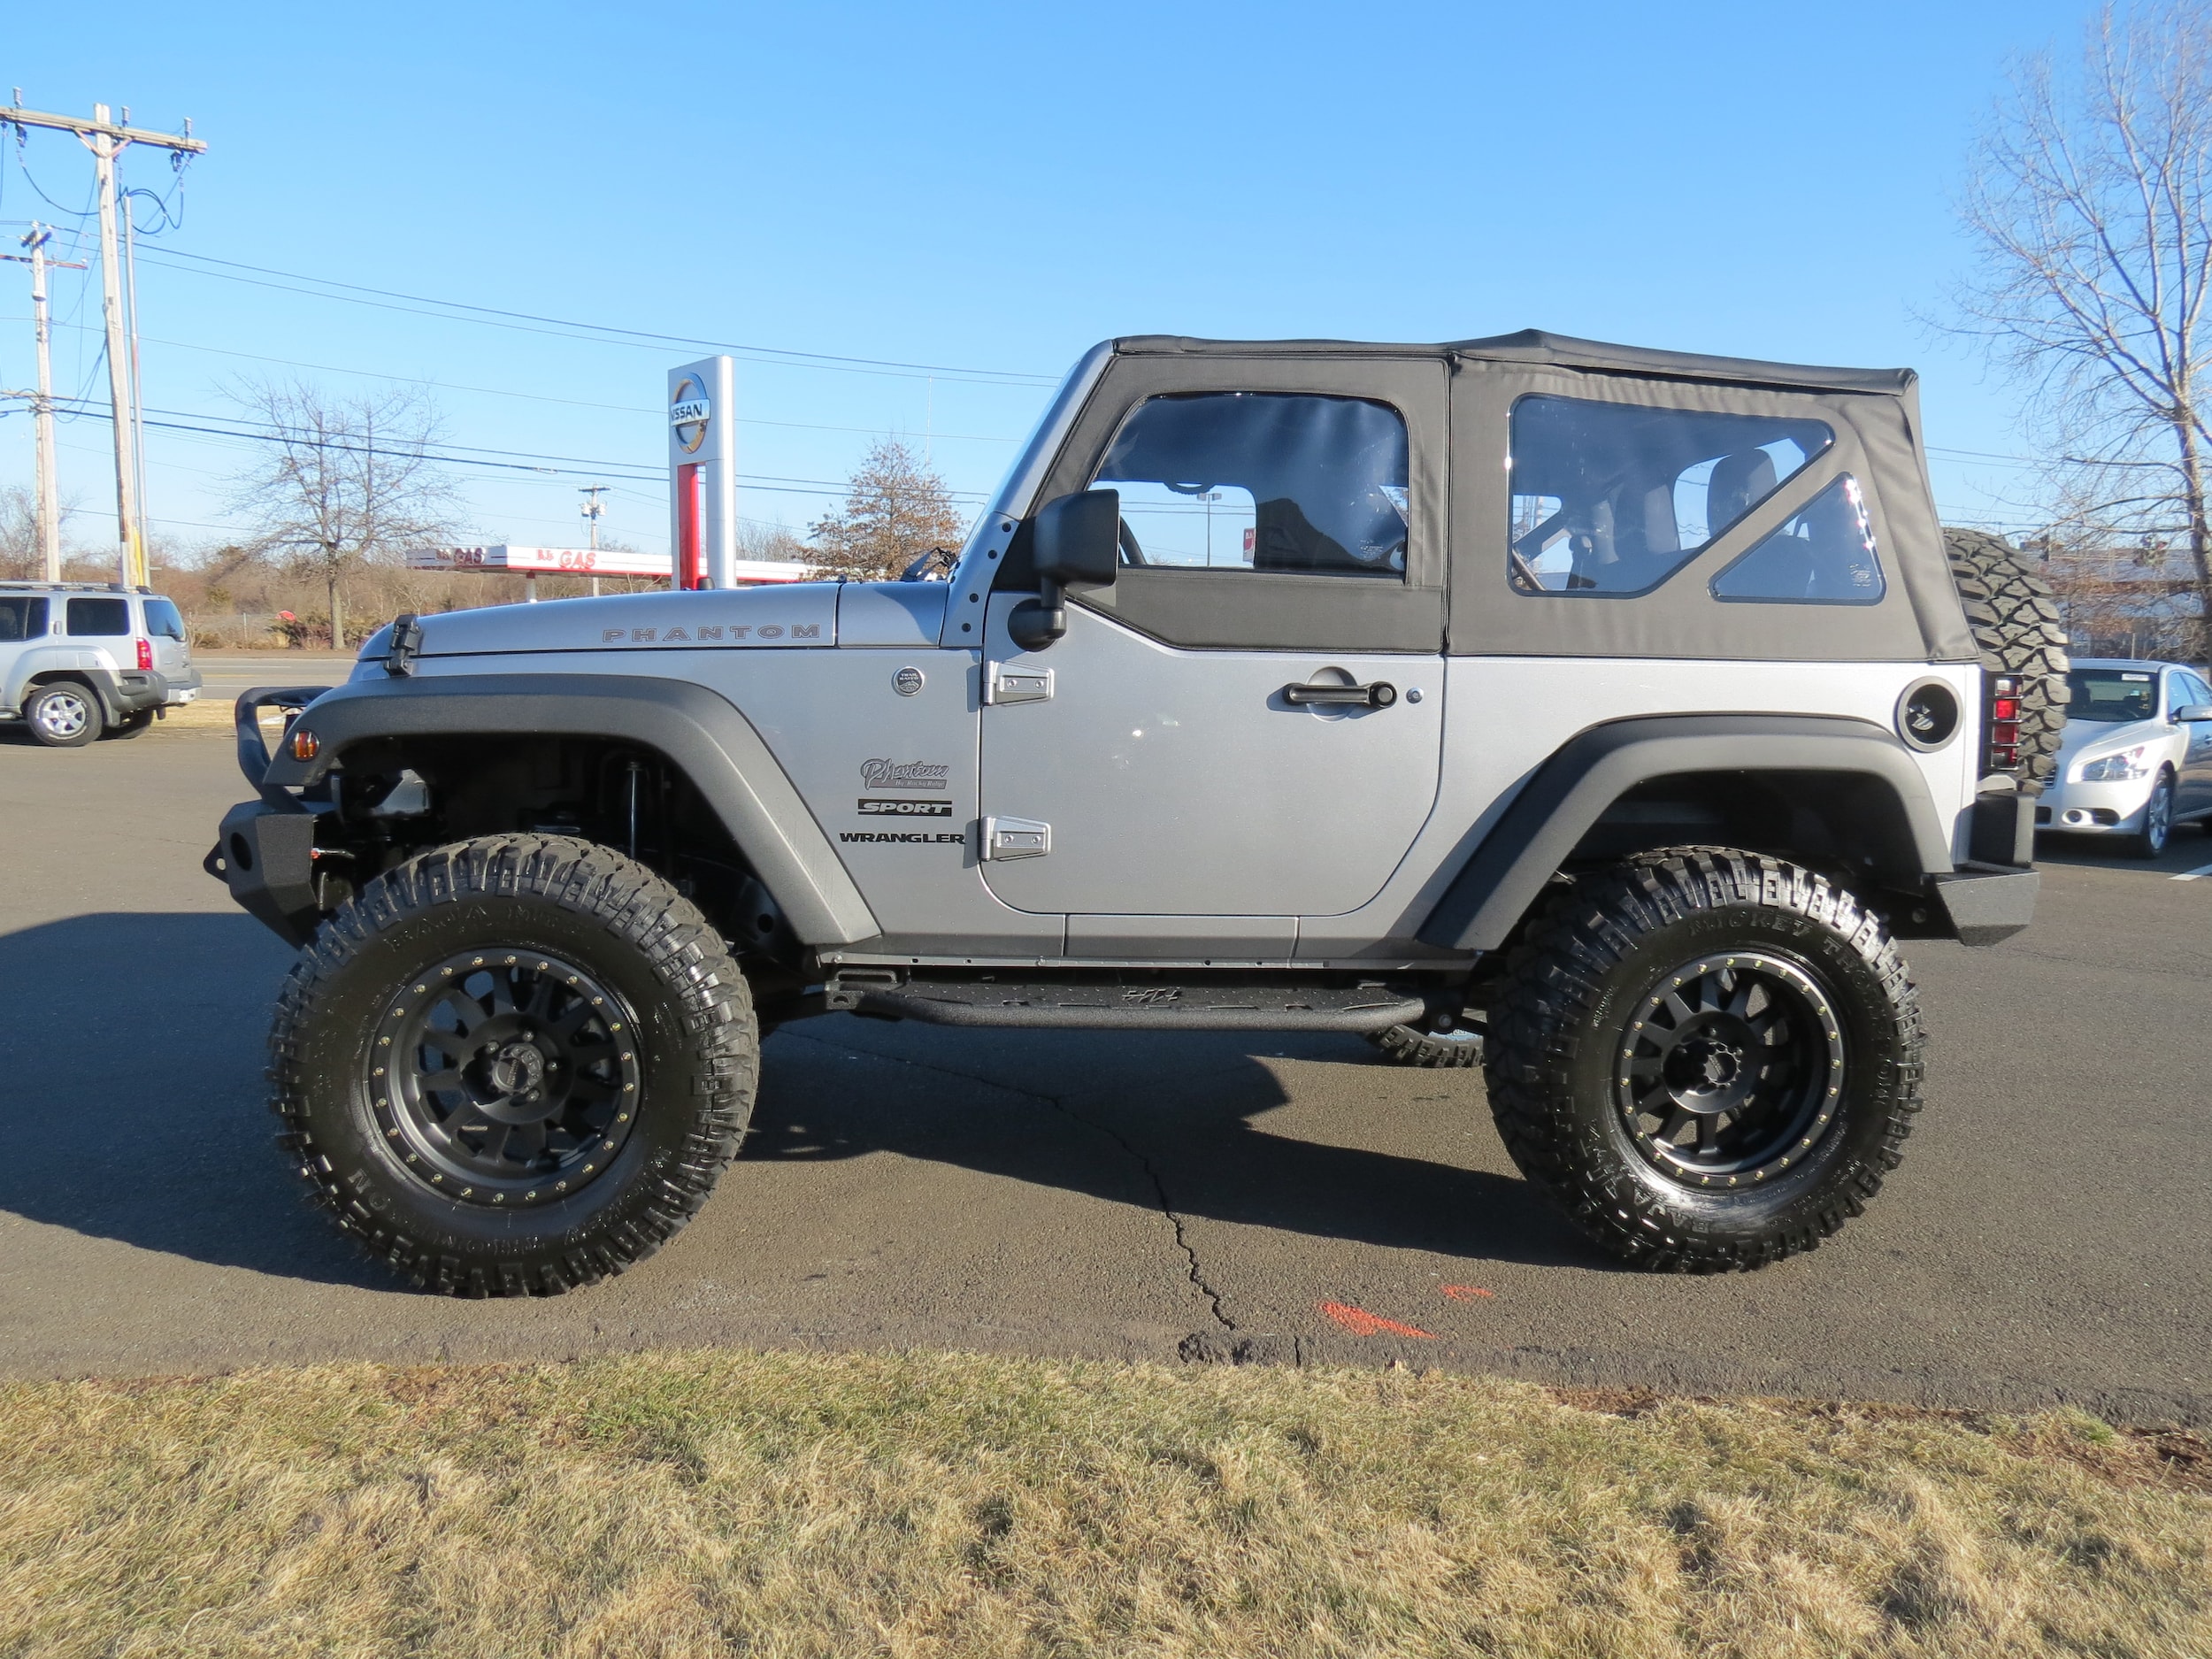 Ct jeep dealers #3